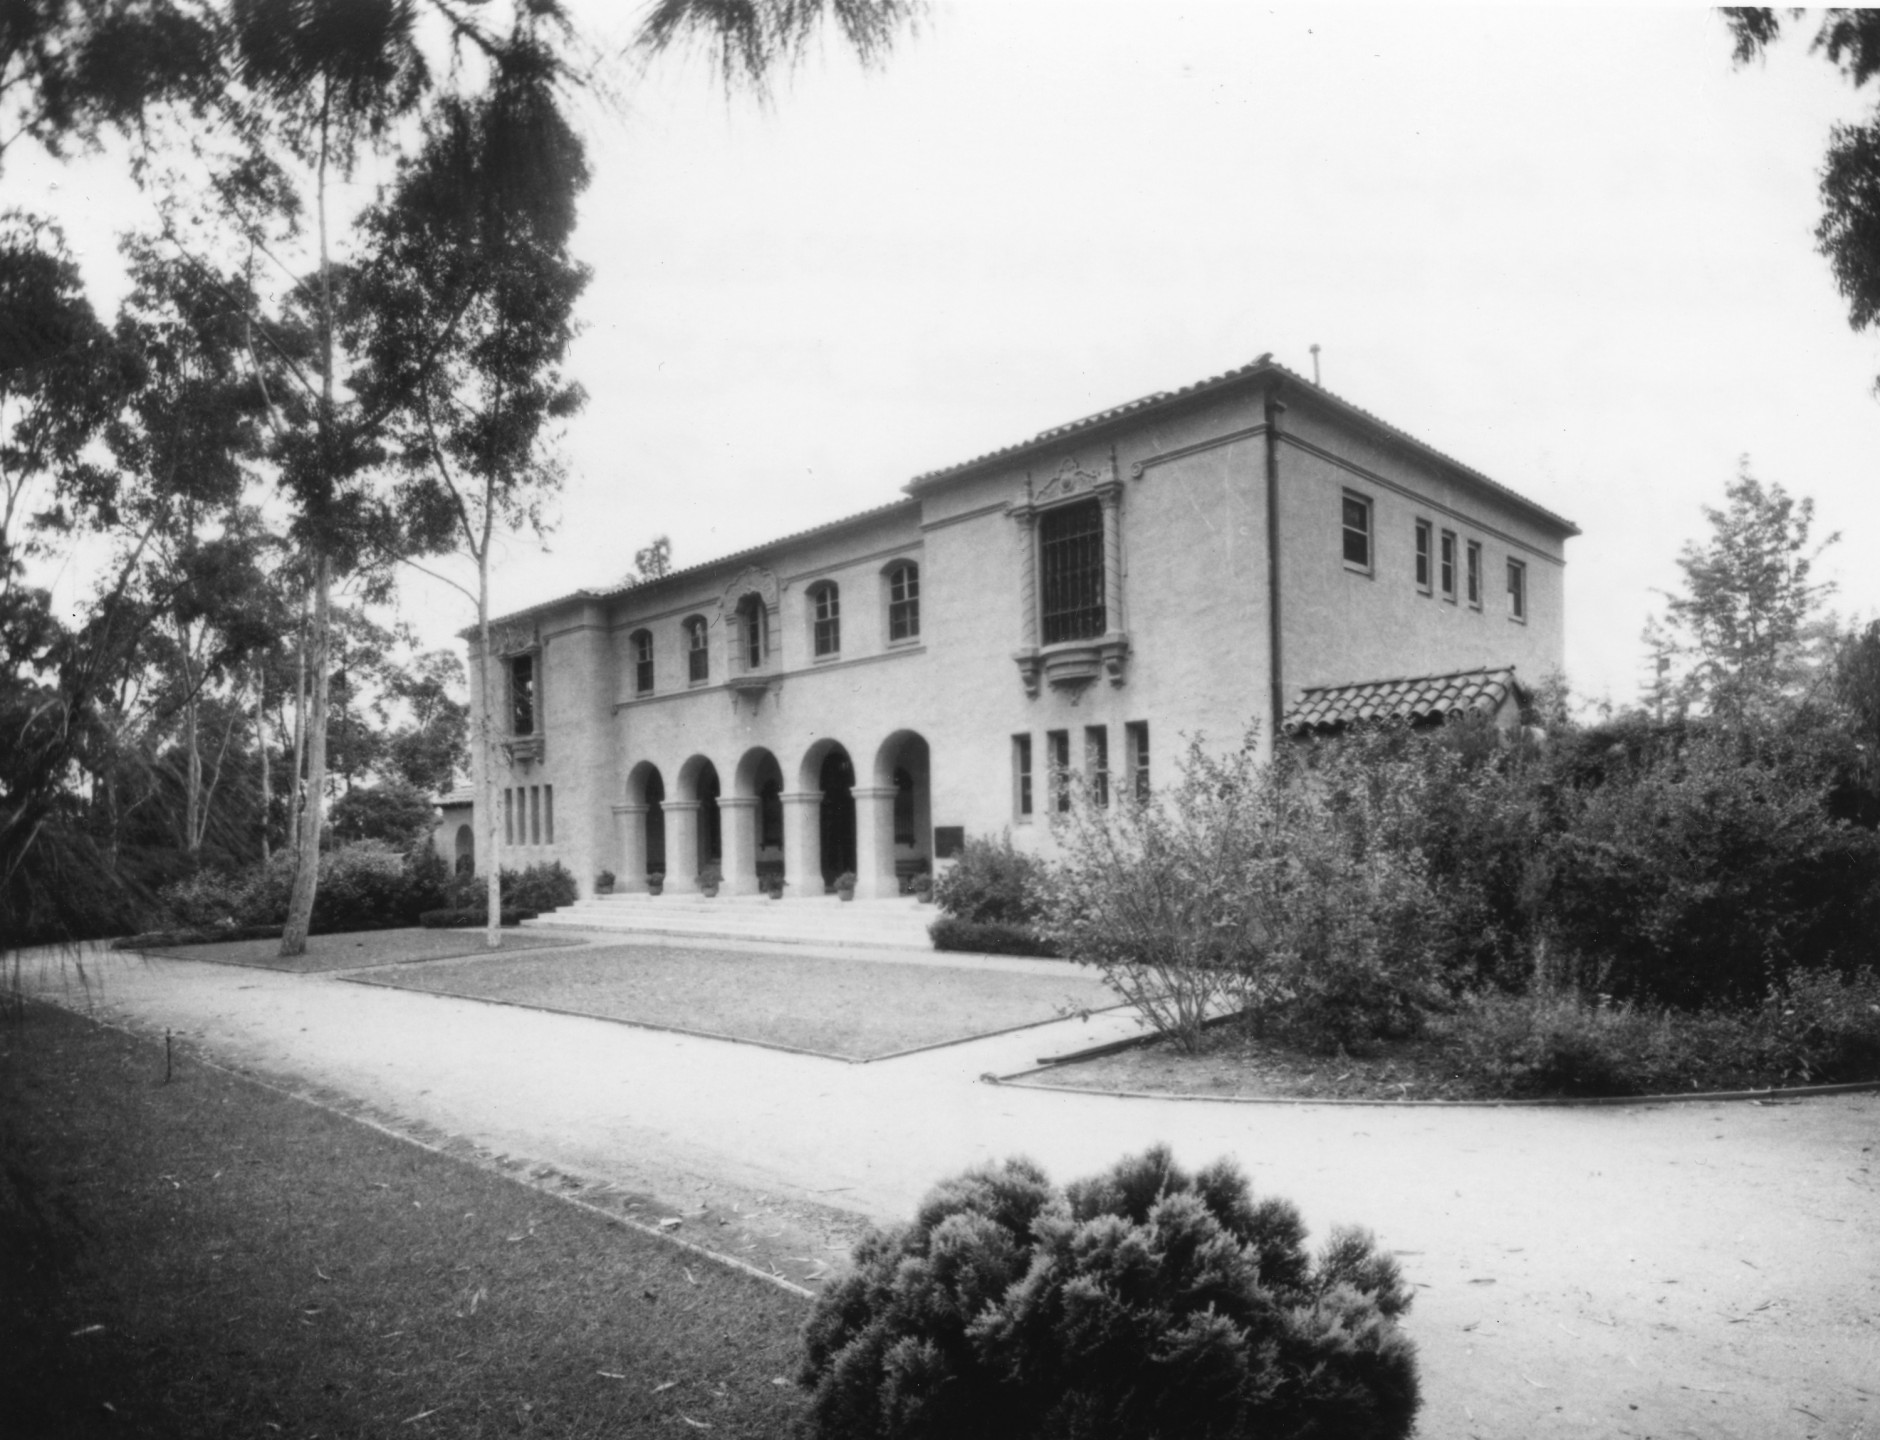 The Ellen Browning Scripps Hospital and Biological Research Institute was one of Dr. Harry's proudest achievements.